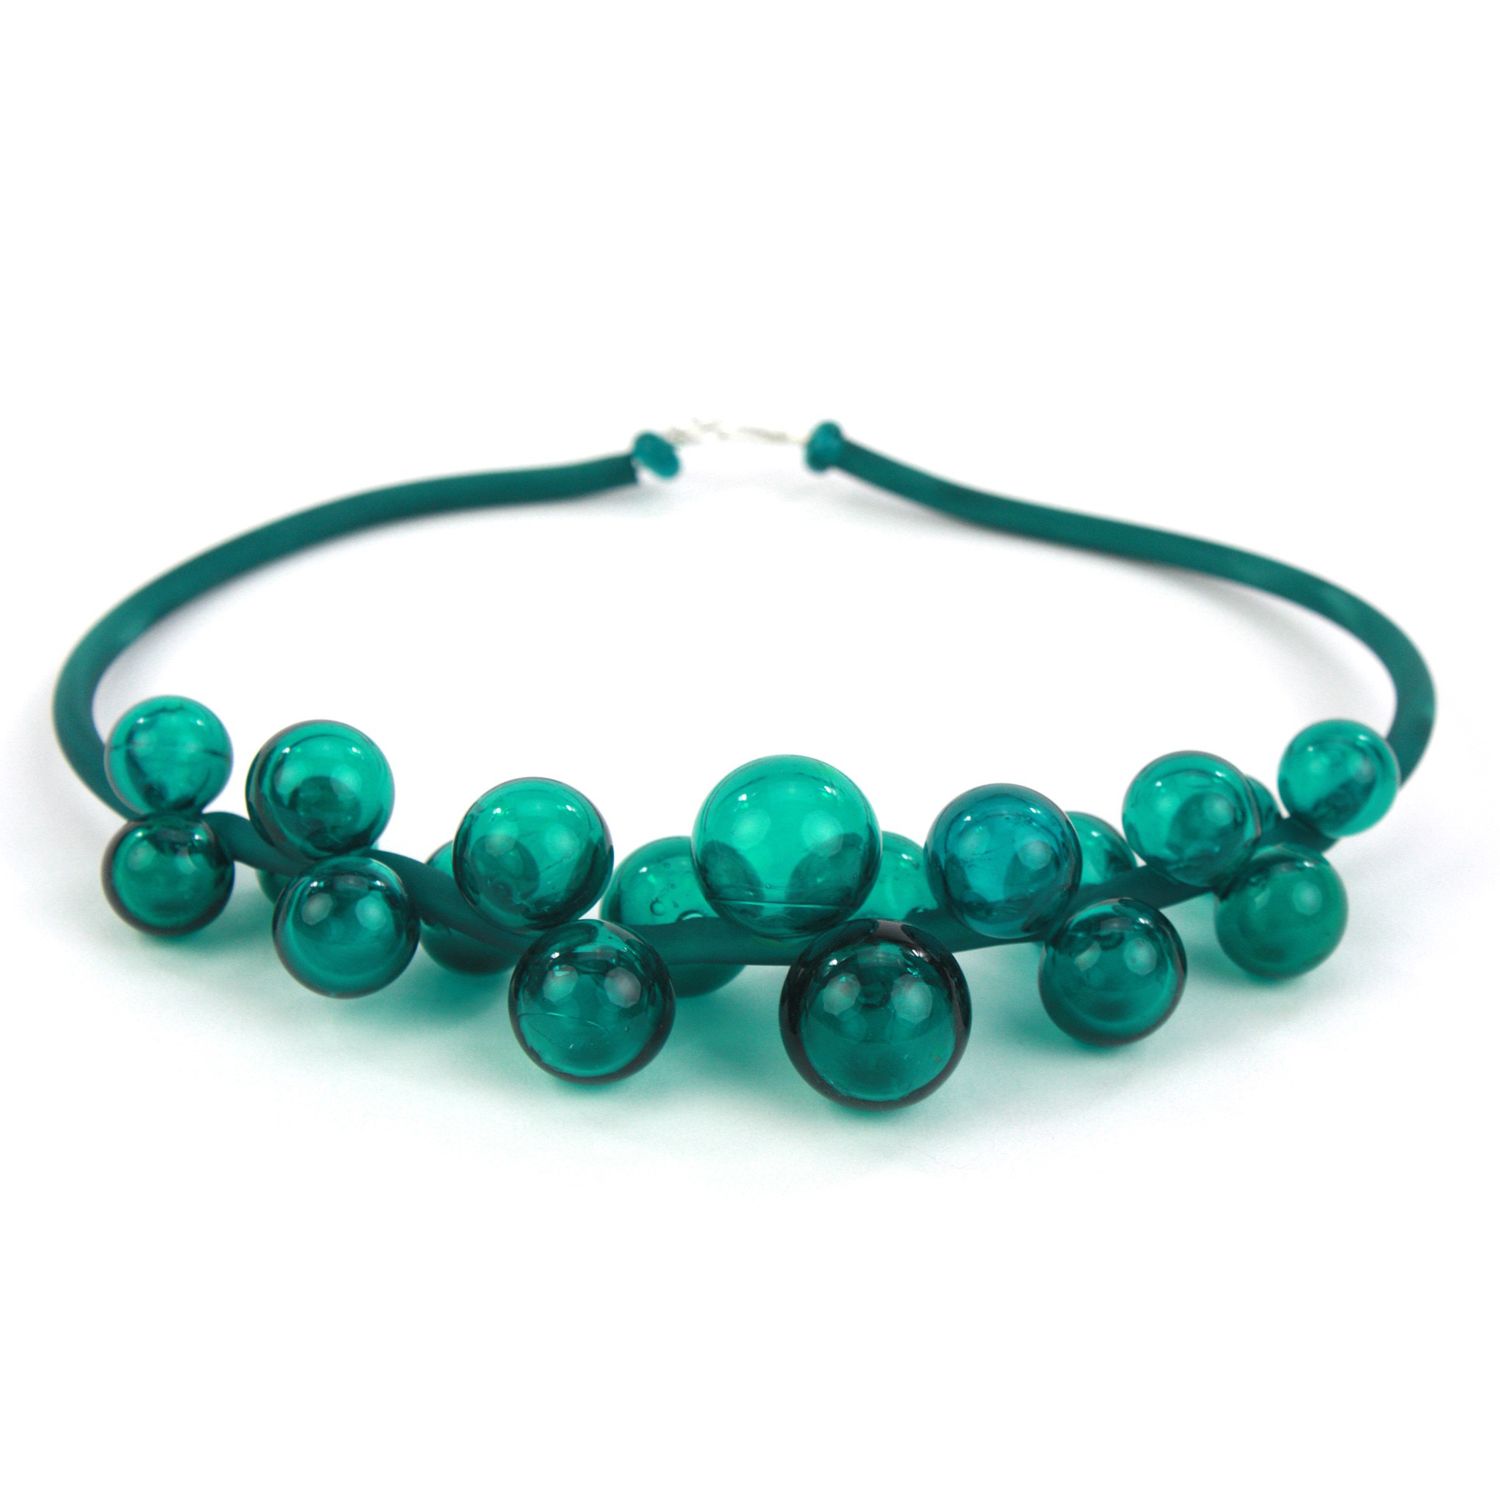 Alicia Niles: Chroma Bola Necklace – Teal Product Image 1 of 3